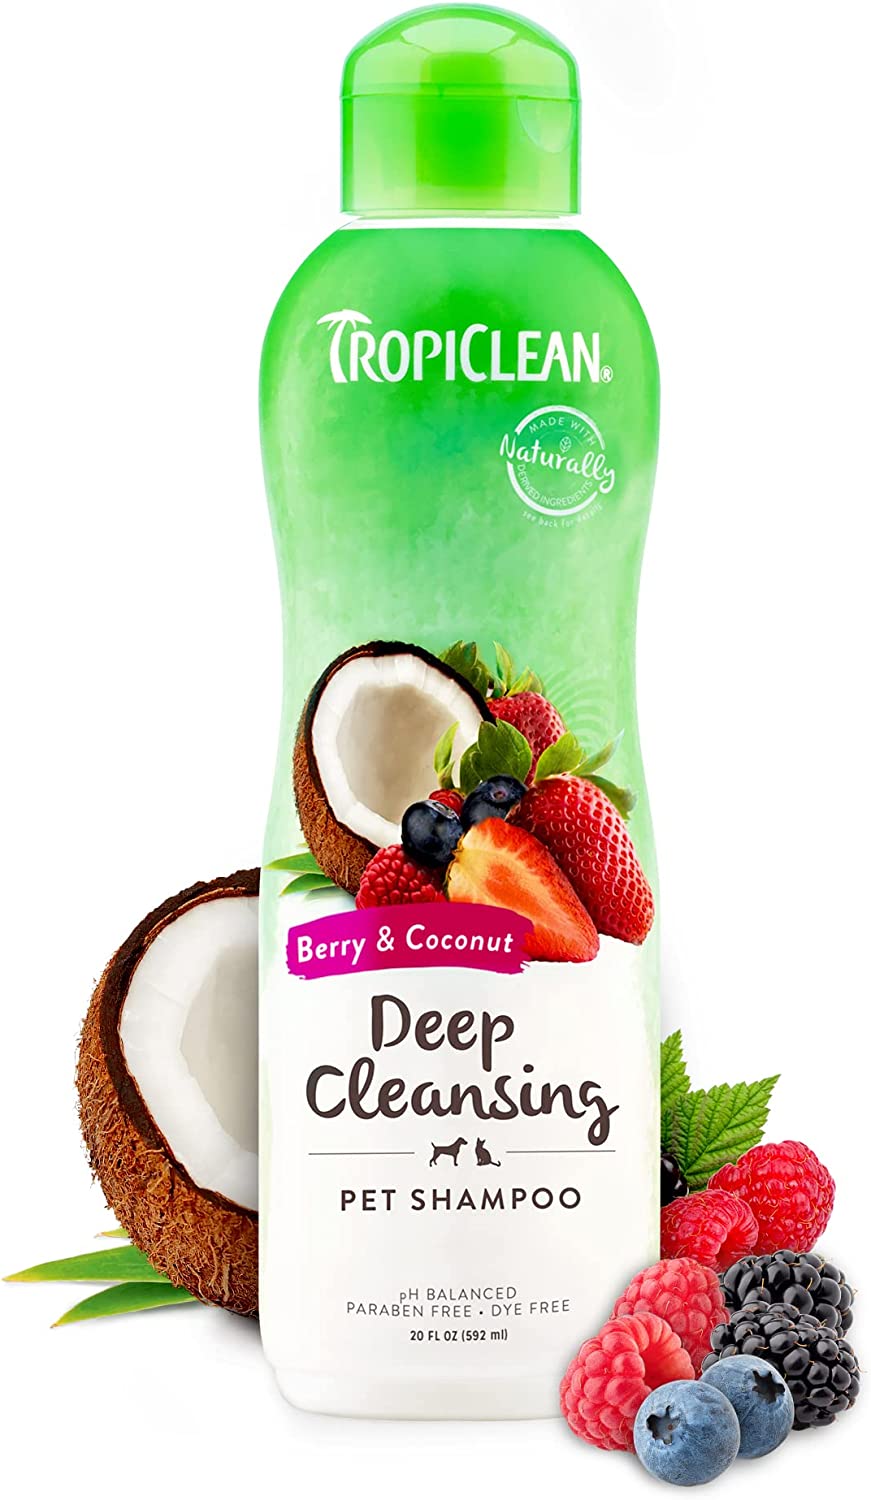 Tropiclean Deep Cleansing Shampoo - BlackPaw - For Every Adventure